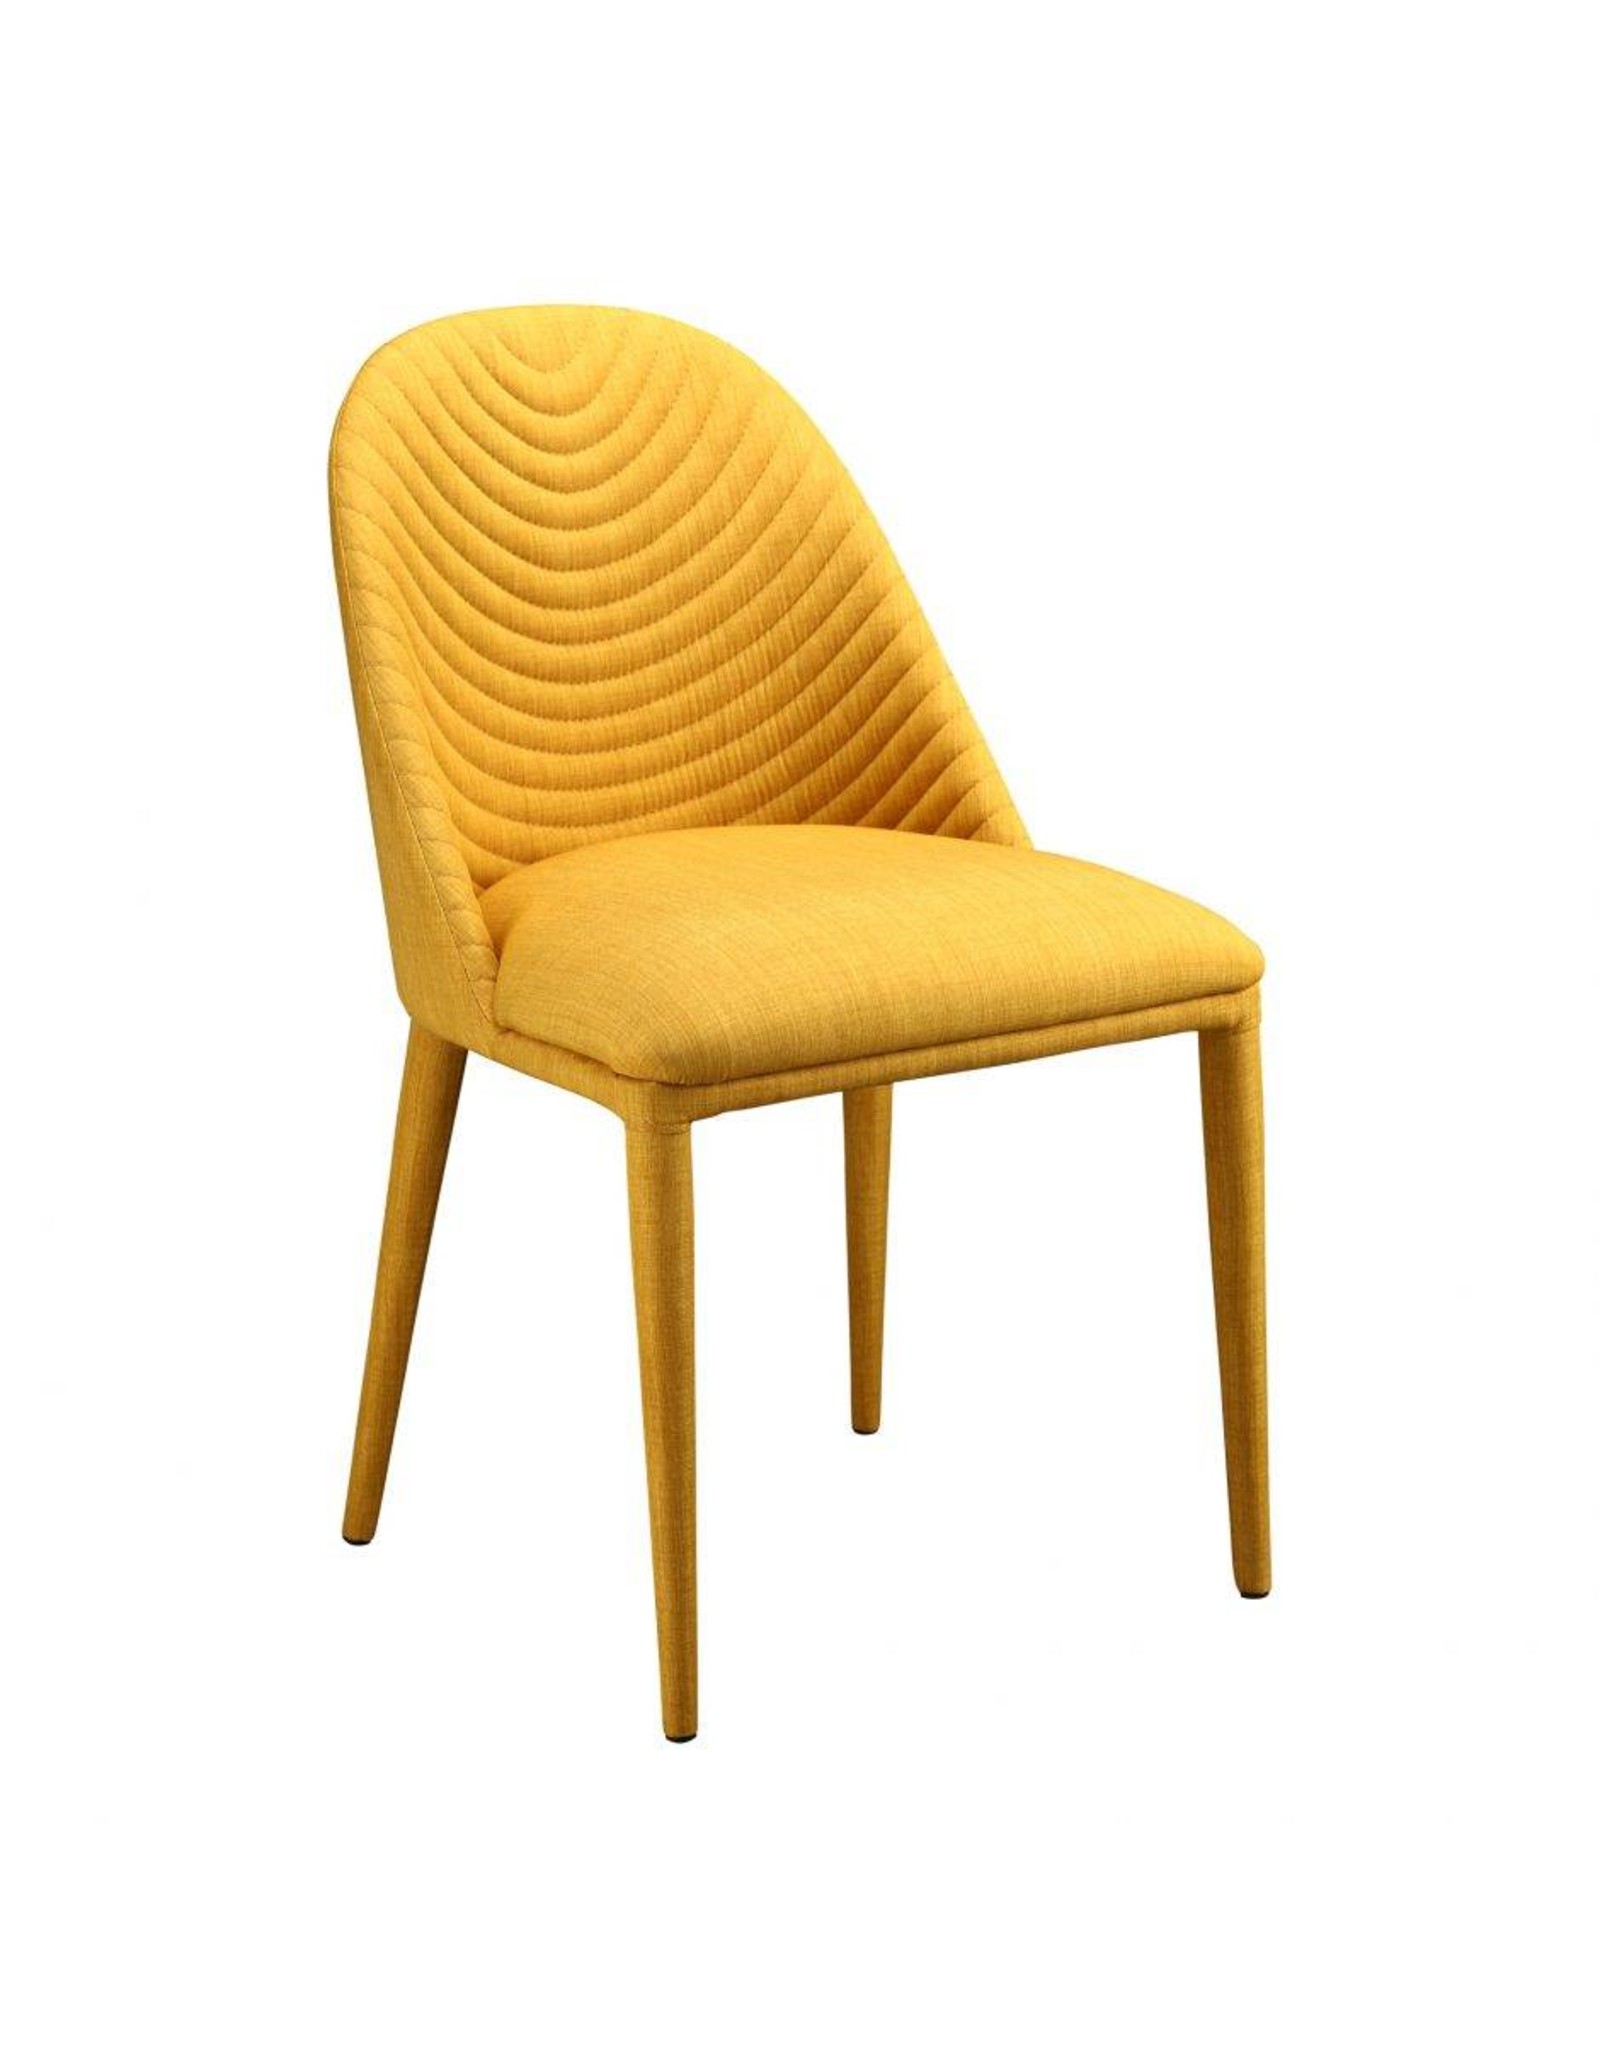 Monroe & Kent LIBBY DINING CHAIR YELLOW